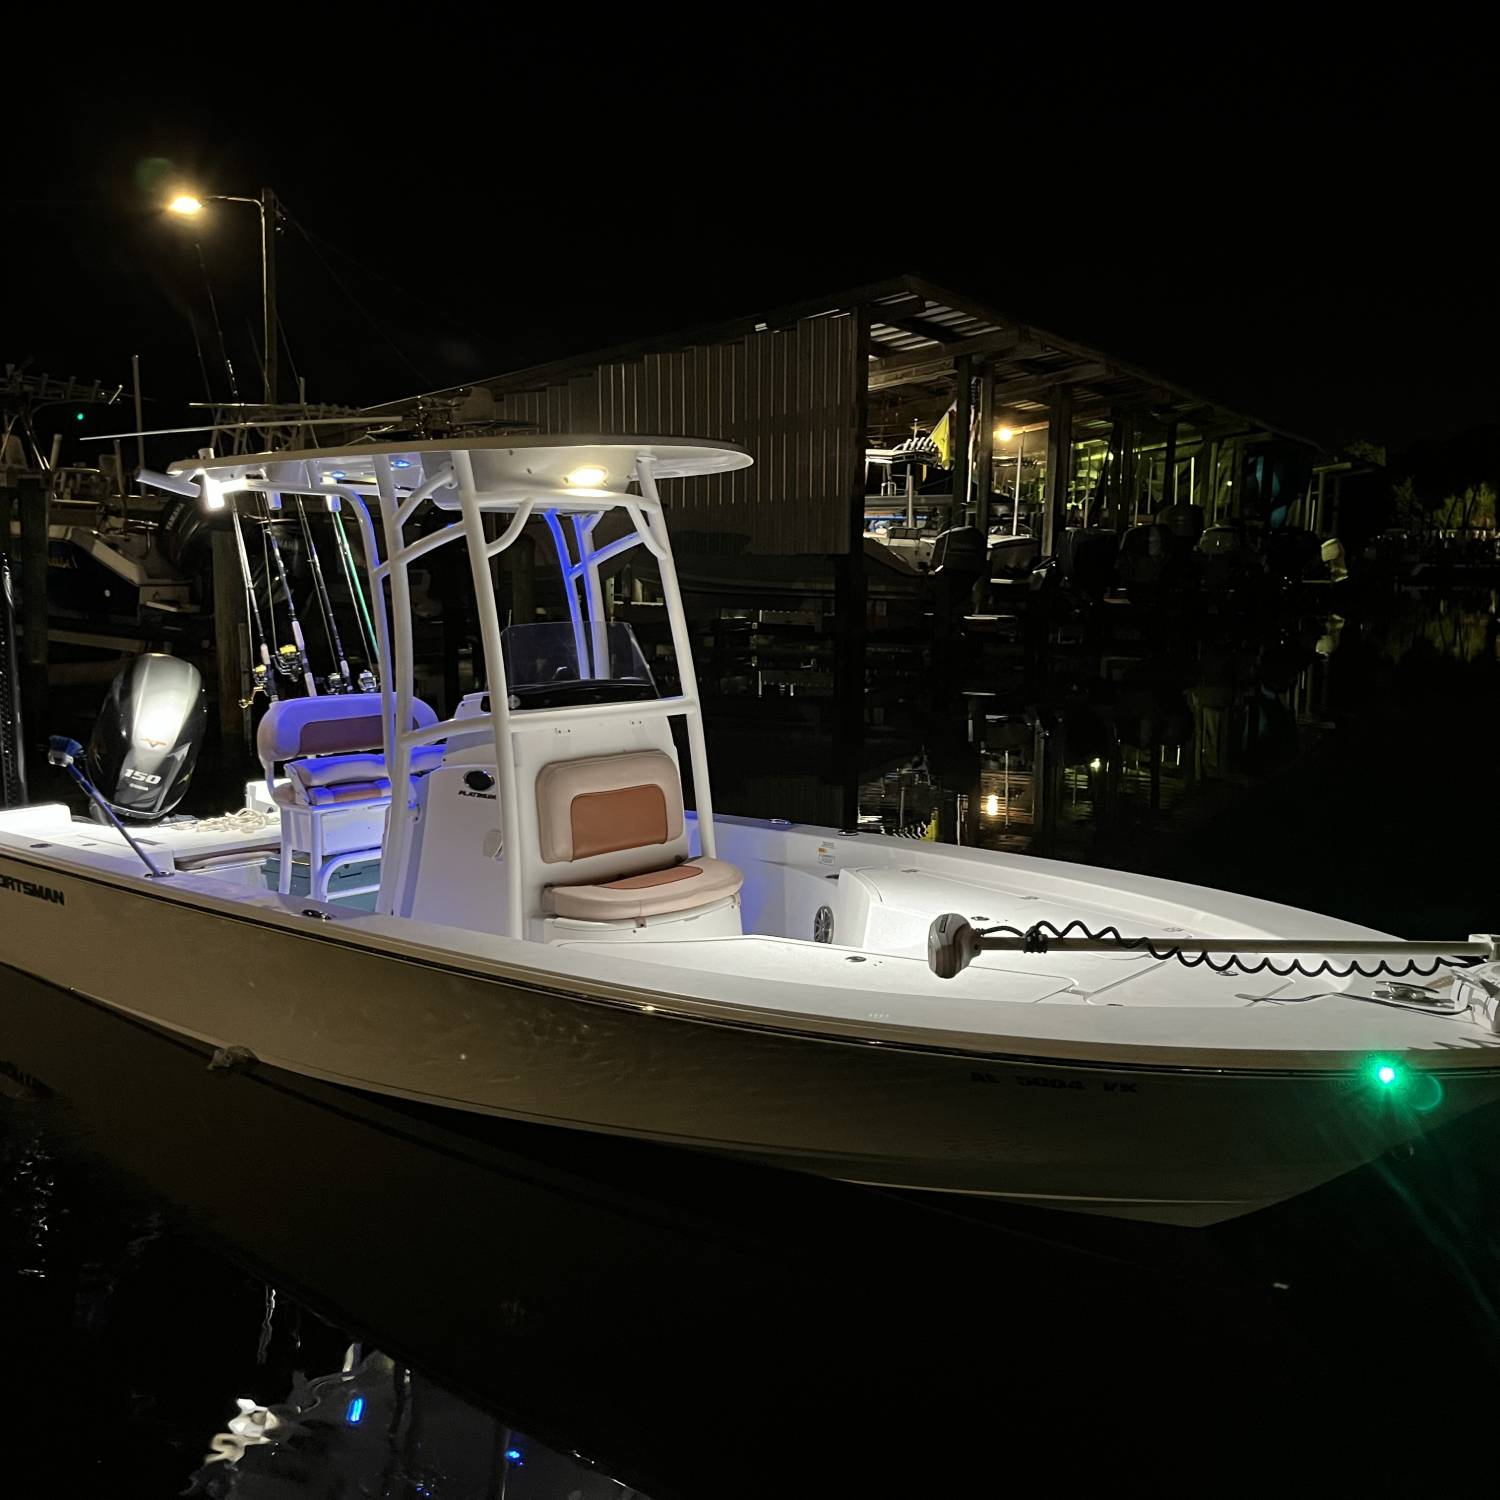 Title: Christmas in July - On board their Sportsman Masters 227 Bay Boat - Location: Oneills Marina - St. Pete. Participating in the Photo Contest #SportsmanJune2023